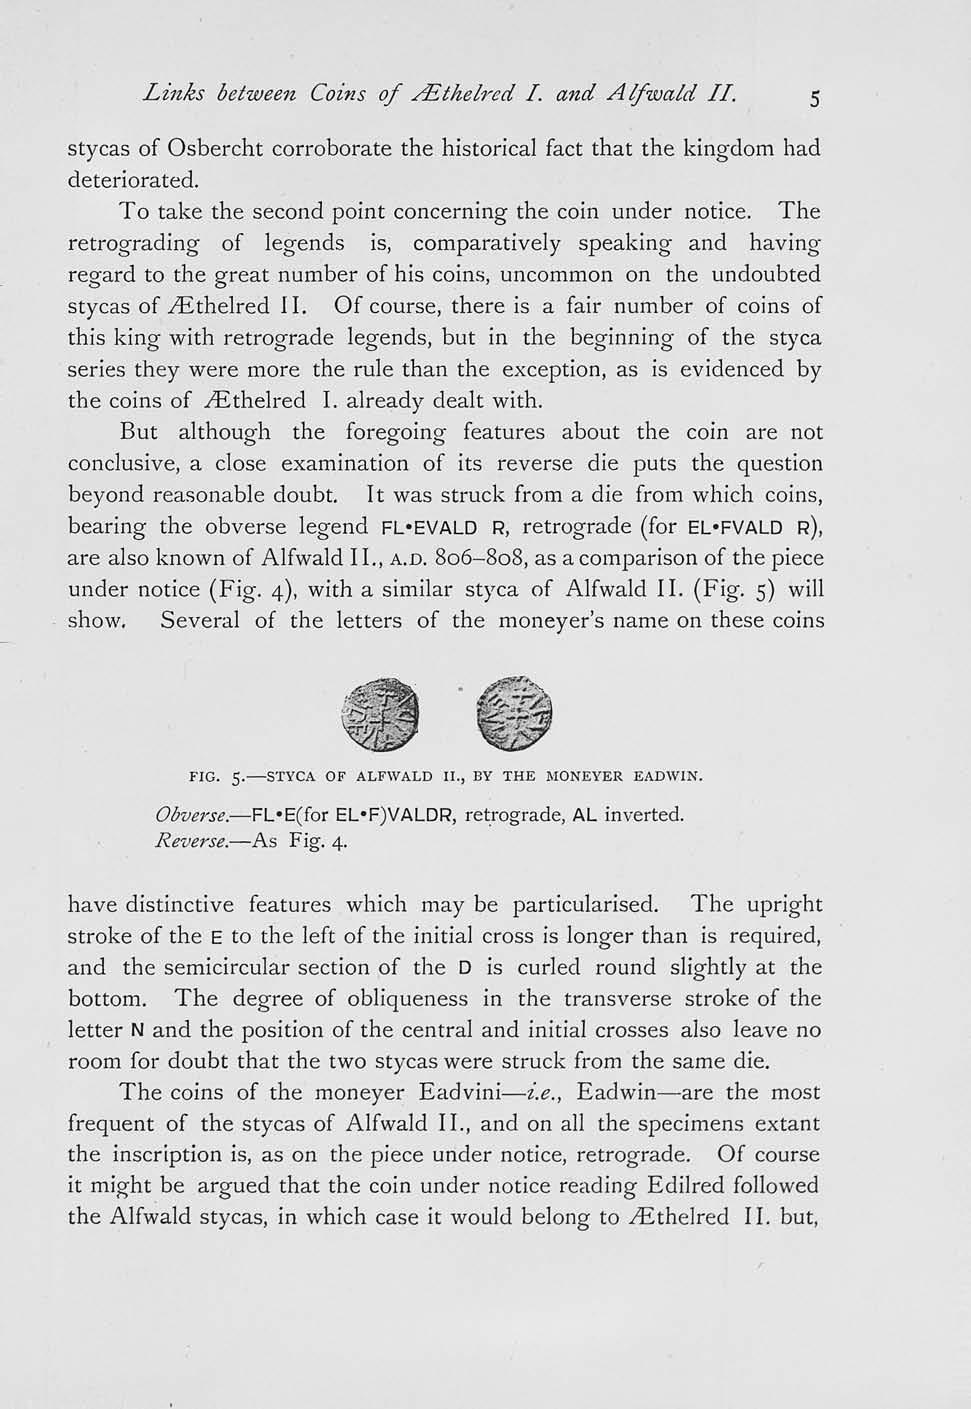 Links between Coins of ALthelred I. and Atfwaid II. stycas of Osbercht corroborate the historical fact that the kingdom had deteriorated. To take the second point concerning the coin under notice.